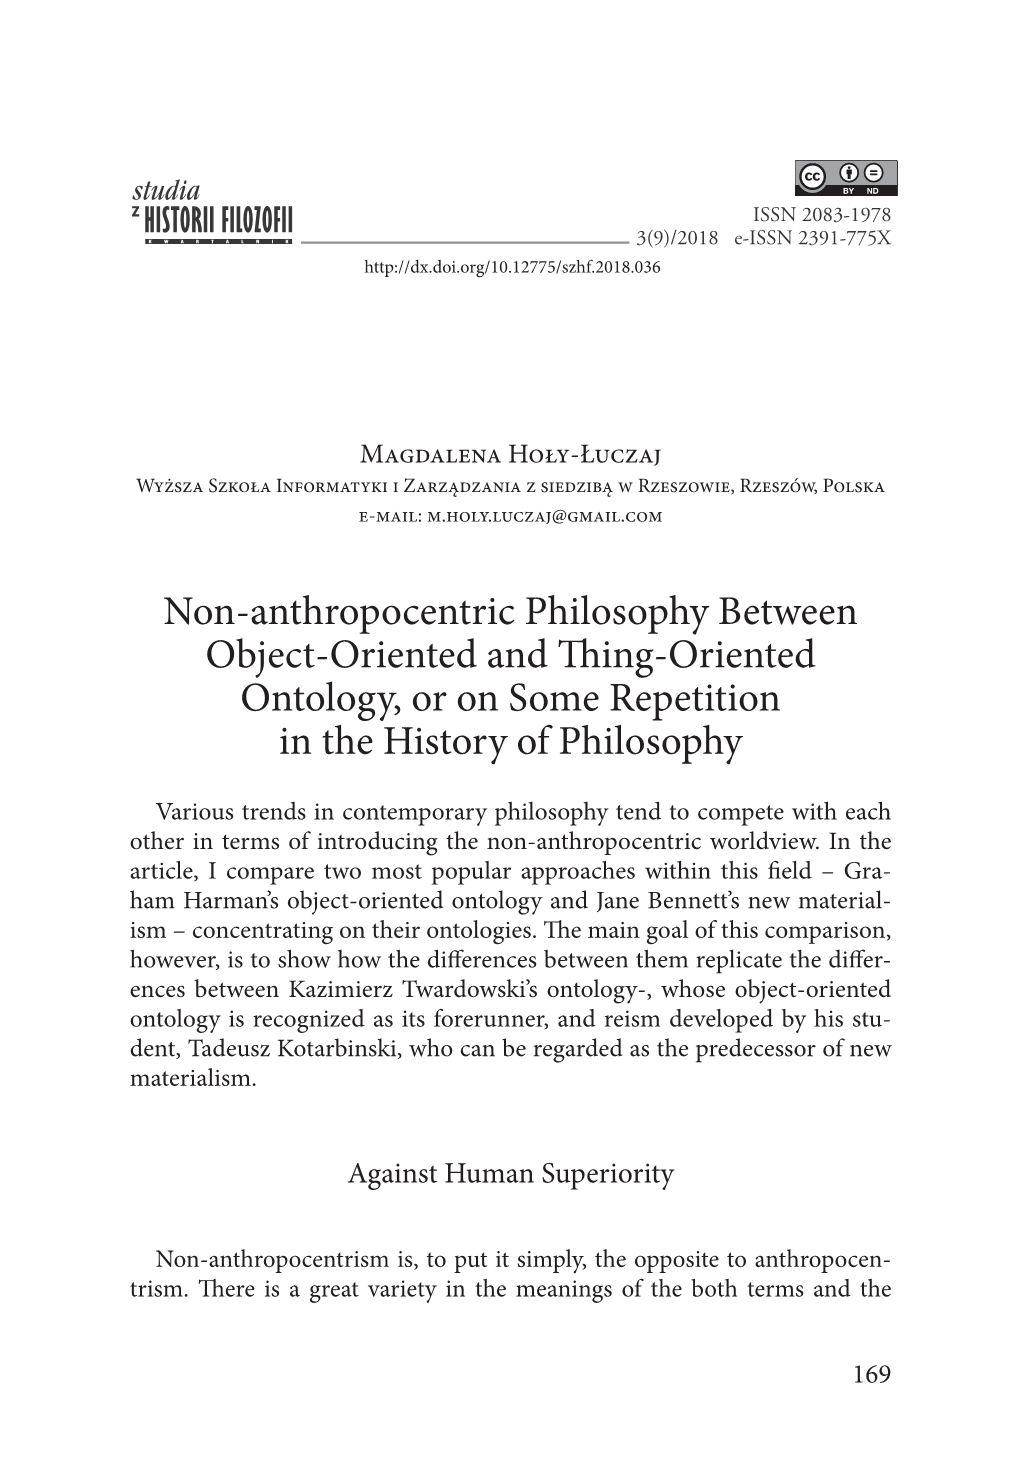 Non-Anthropocentric Philosophy Between Object-Oriented and Thing-Oriented Ontology, Or on Some Repetition in the History of Philosophy